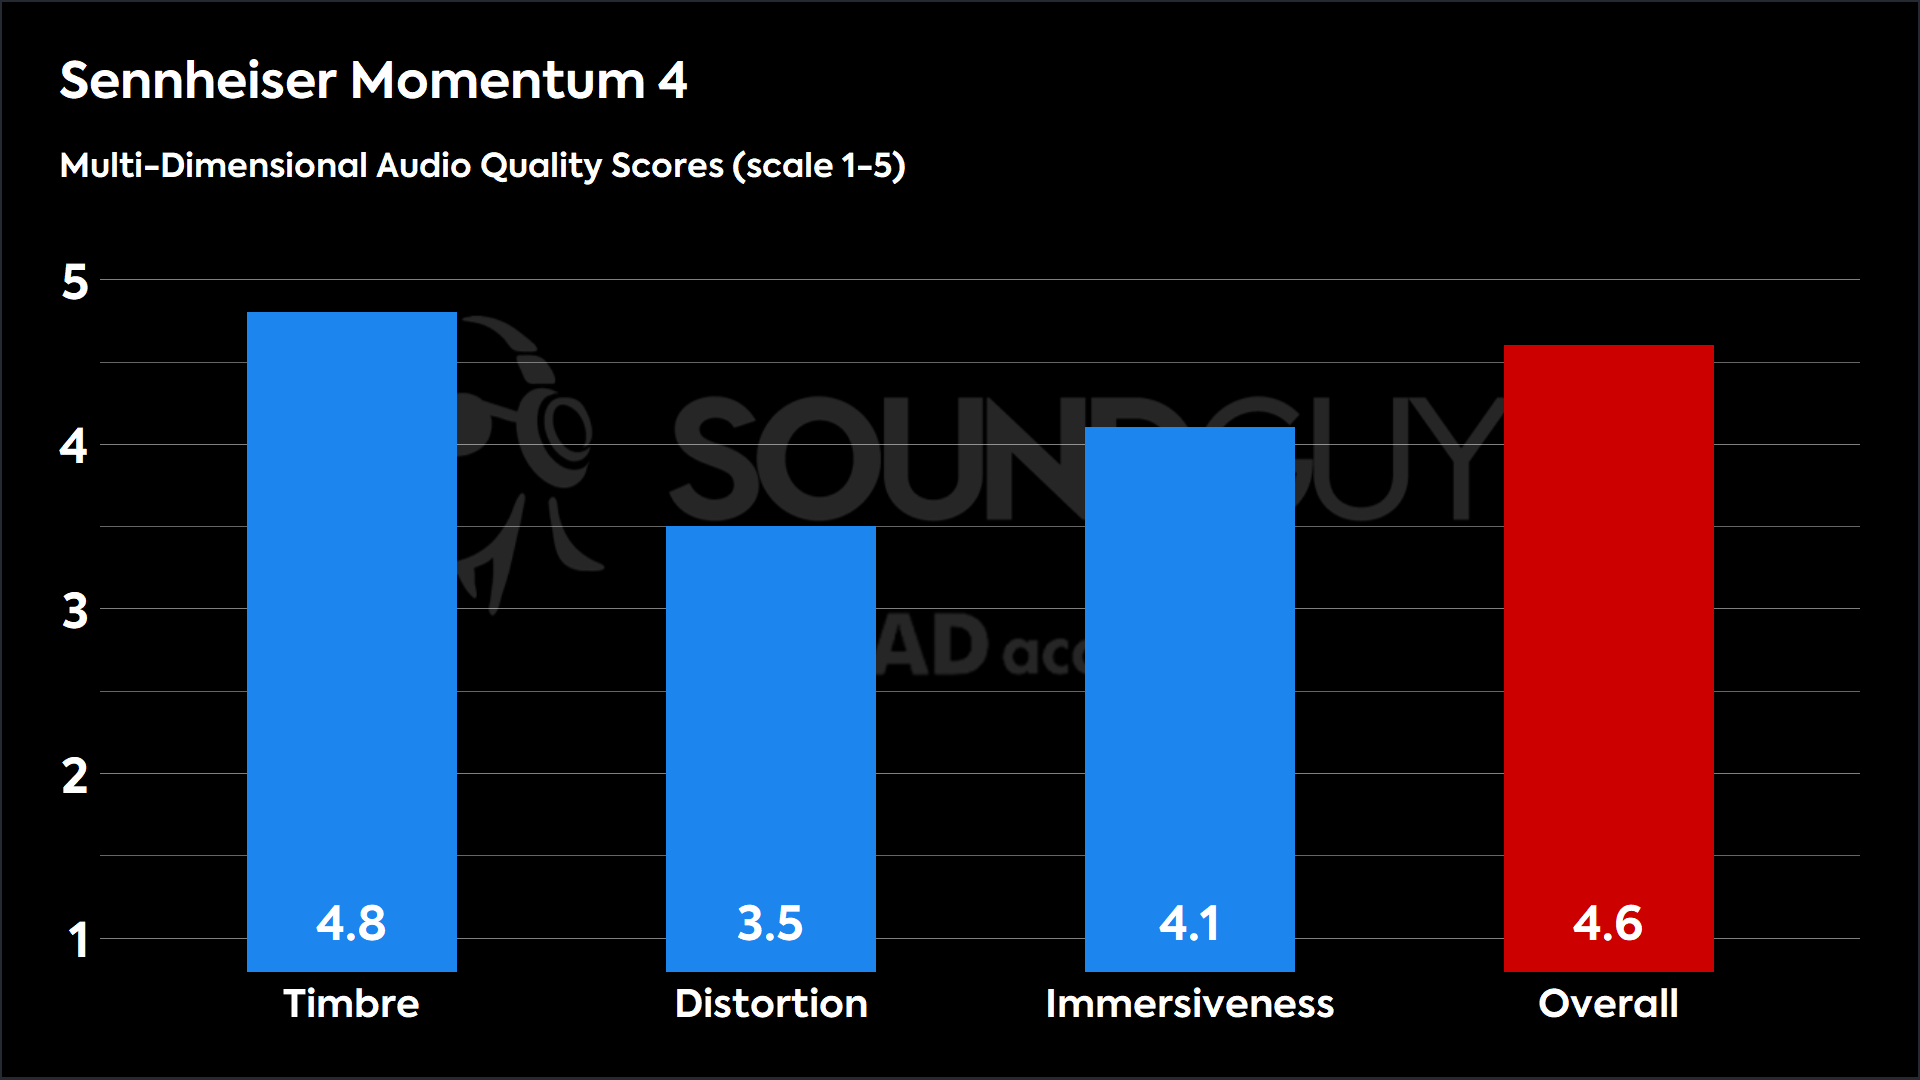 This chart shows the MDAQS results for the Sennheiser Momentum 4 in Default mode. The Timbre score is 4.8, The Distortion score is 3.5, the Immersiveness score is 4.1, and the Overall Score is 4.6).